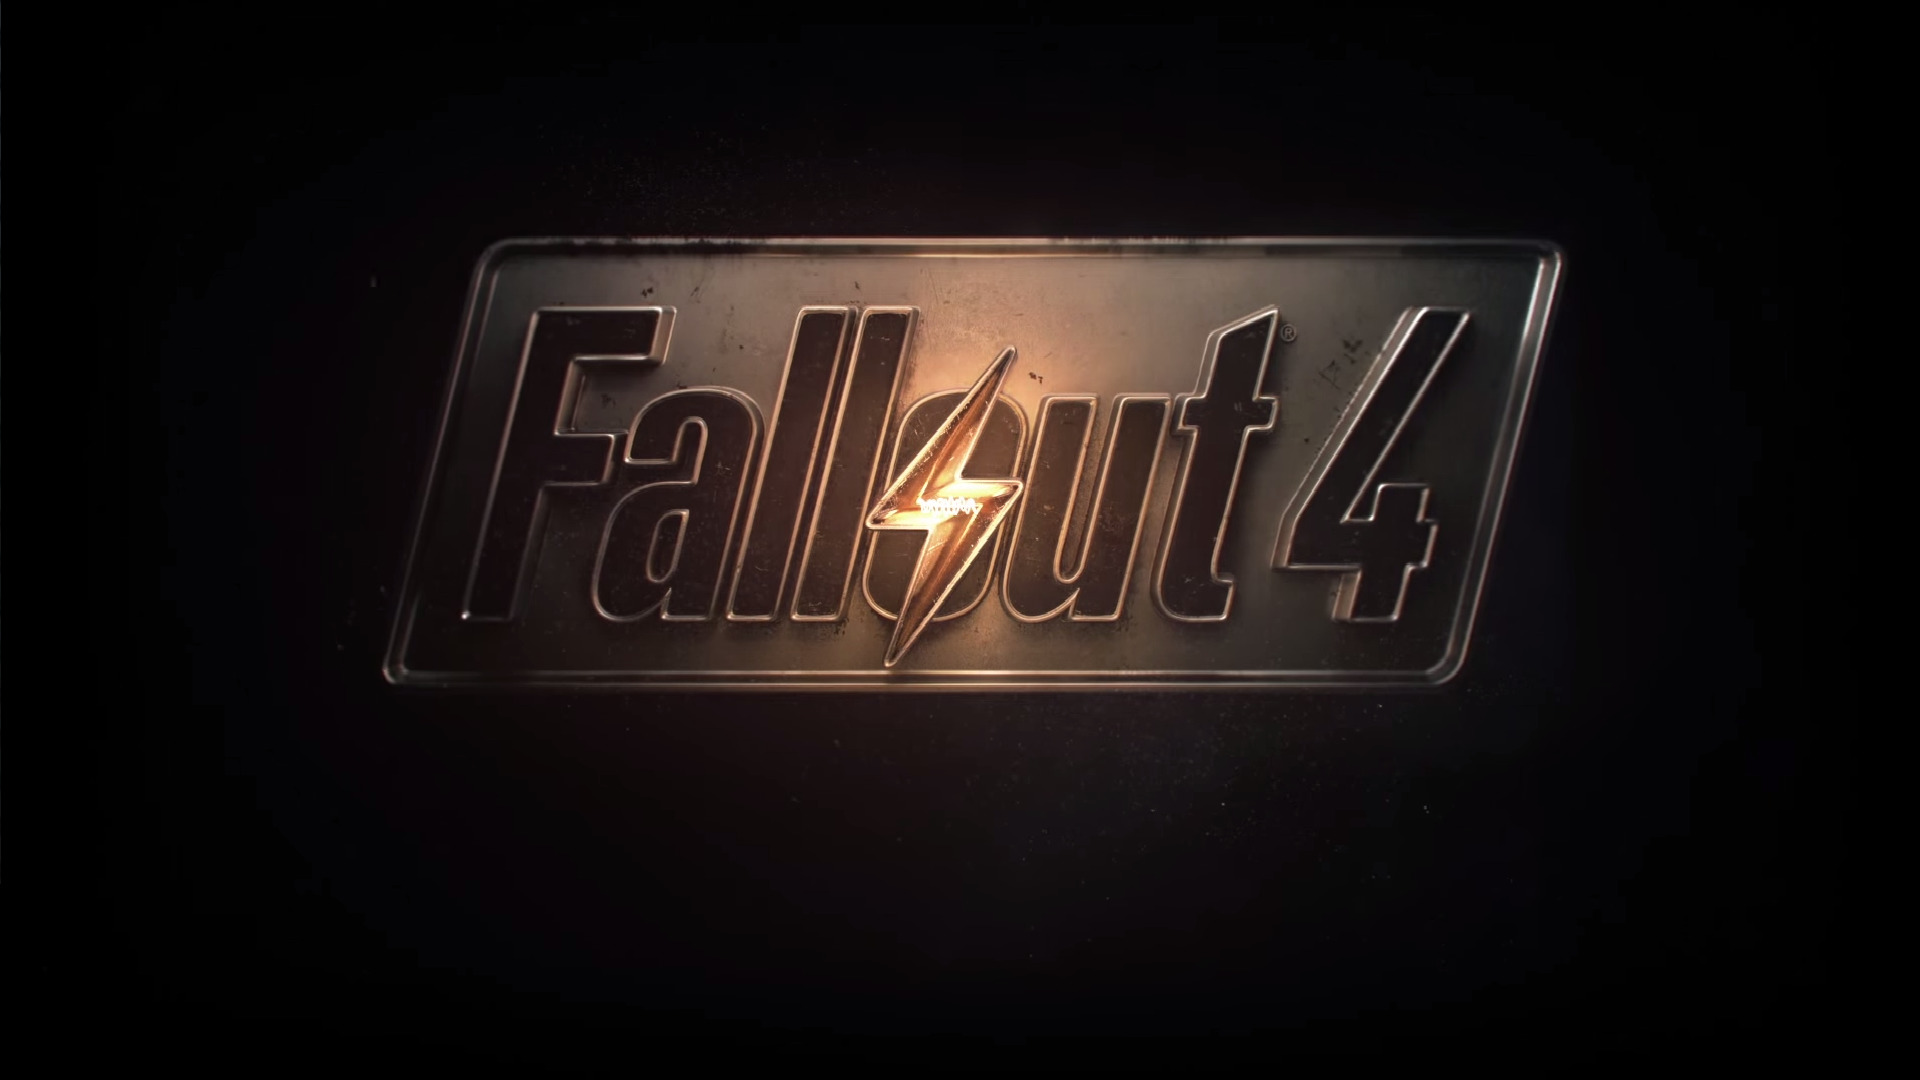 Fallout 4, Fallout, Typography, Black Background, Video Games Wallpaper